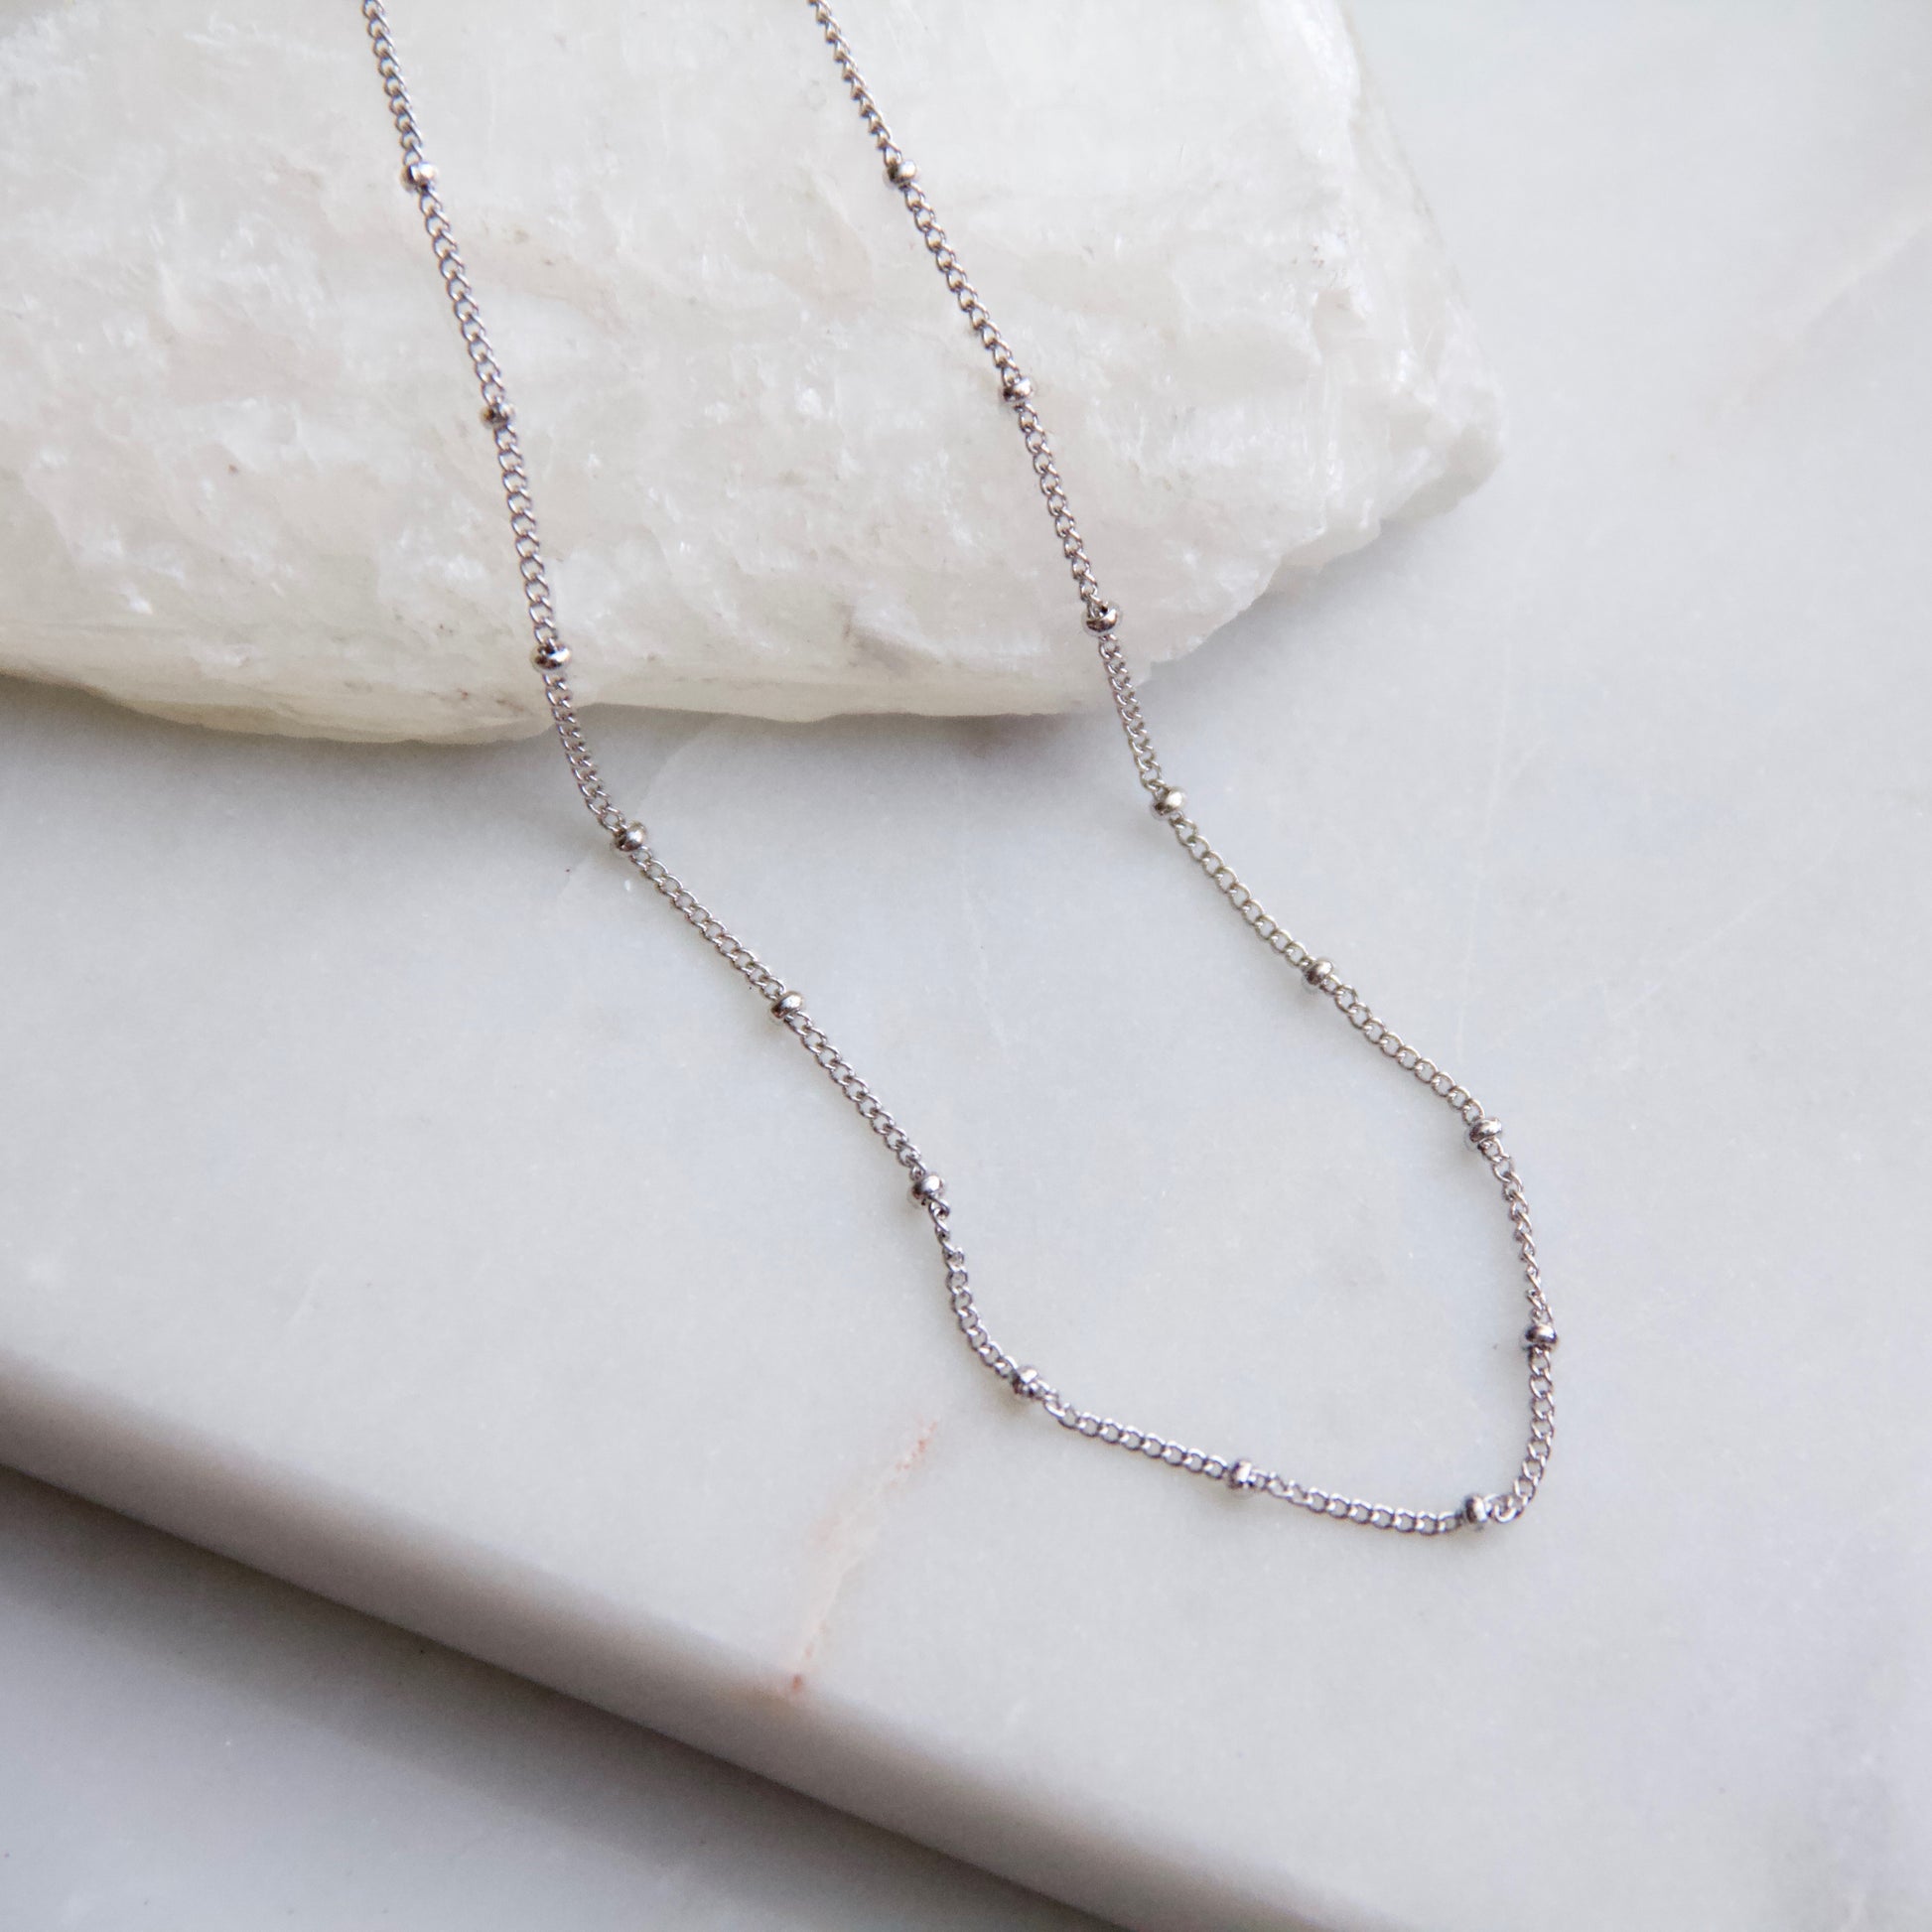 Just A Chain Necklace - Storm and Sky Shoppe